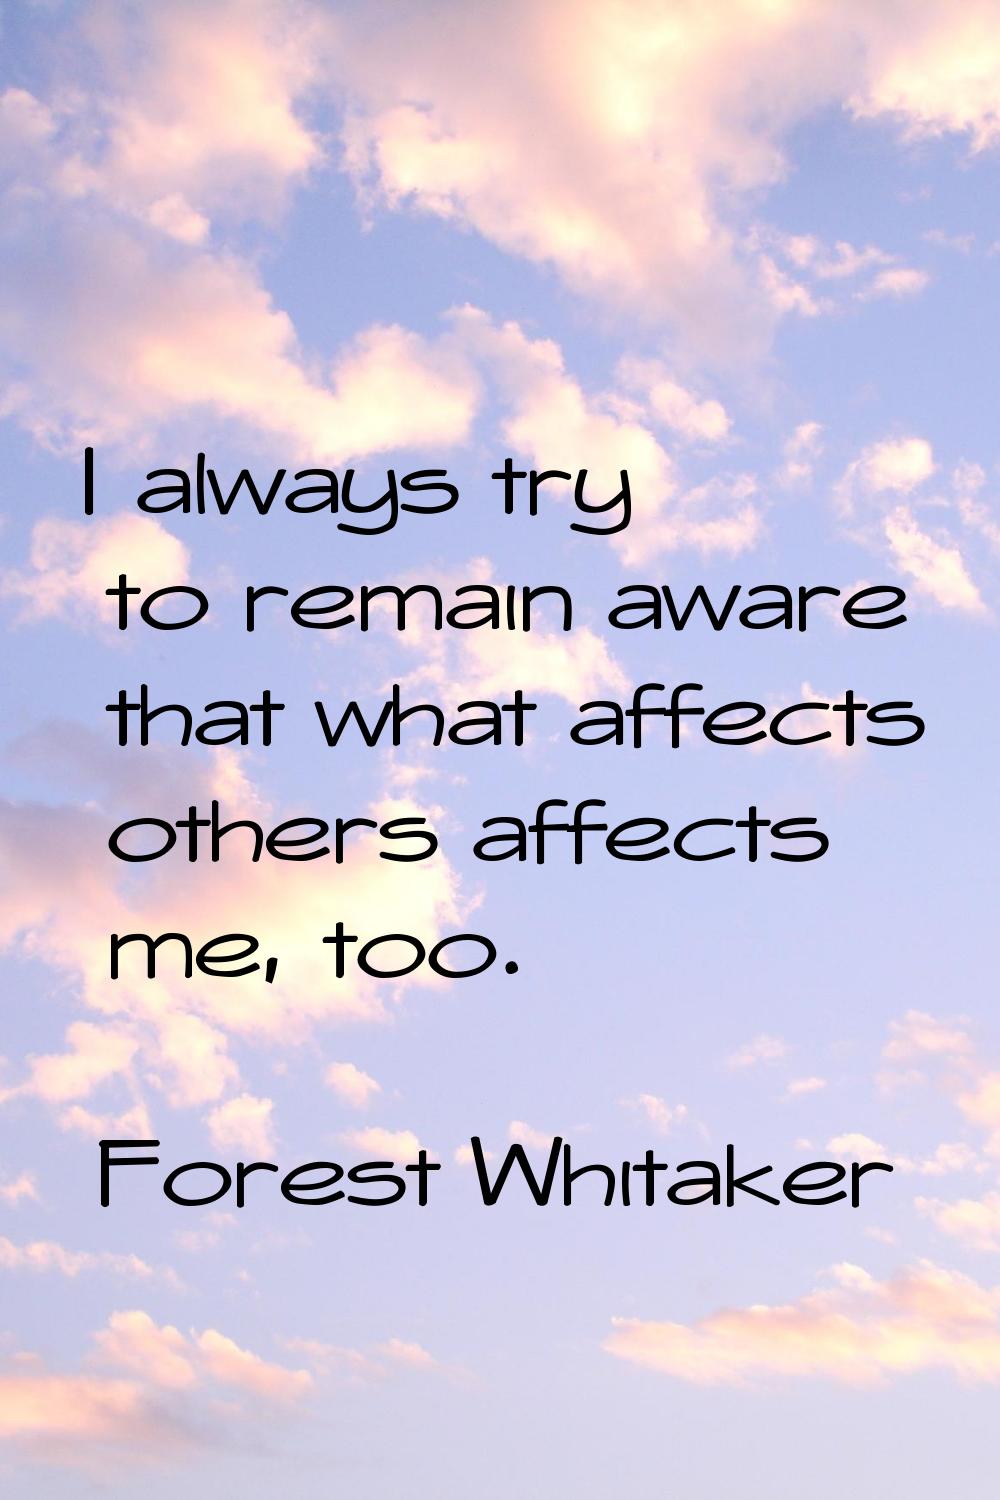 I always try to remain aware that what affects others affects me, too.